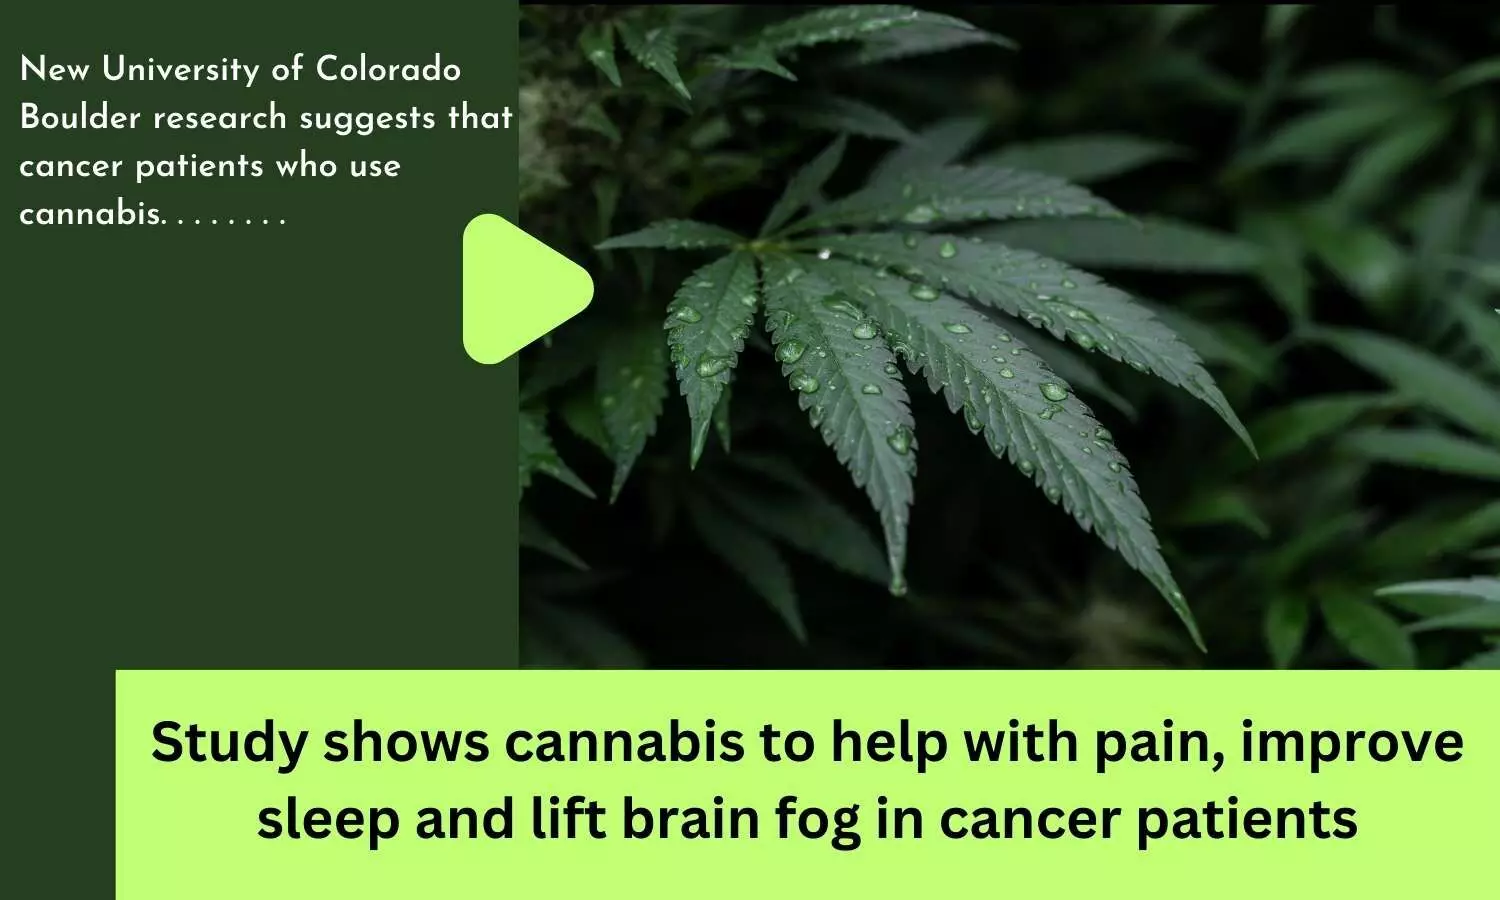 Study shows cannabis to help with pain, improve sleep and lift brain fog in cancer patients